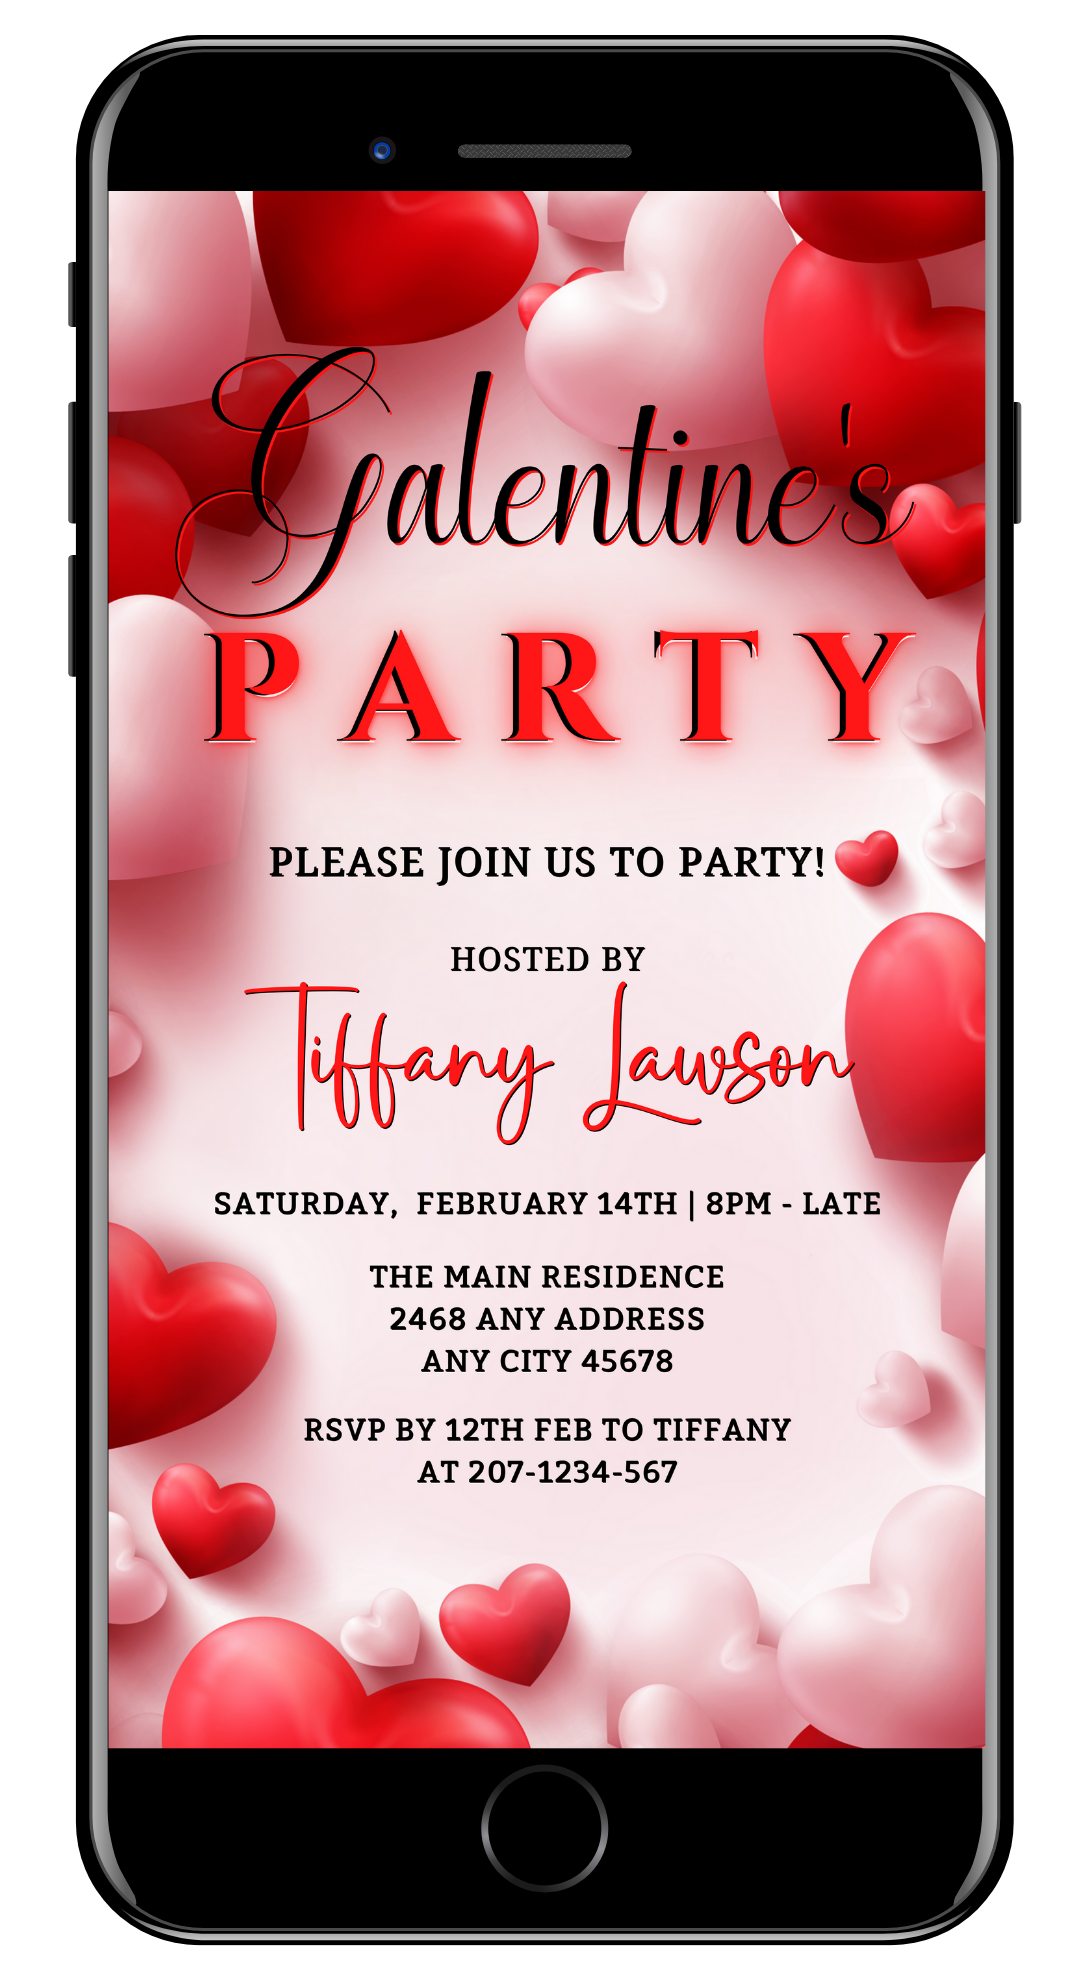 White Boarder Red Hearts Galentines Party Evite displayed on a smartphone screen, featuring editable text and easy customization via Canva.